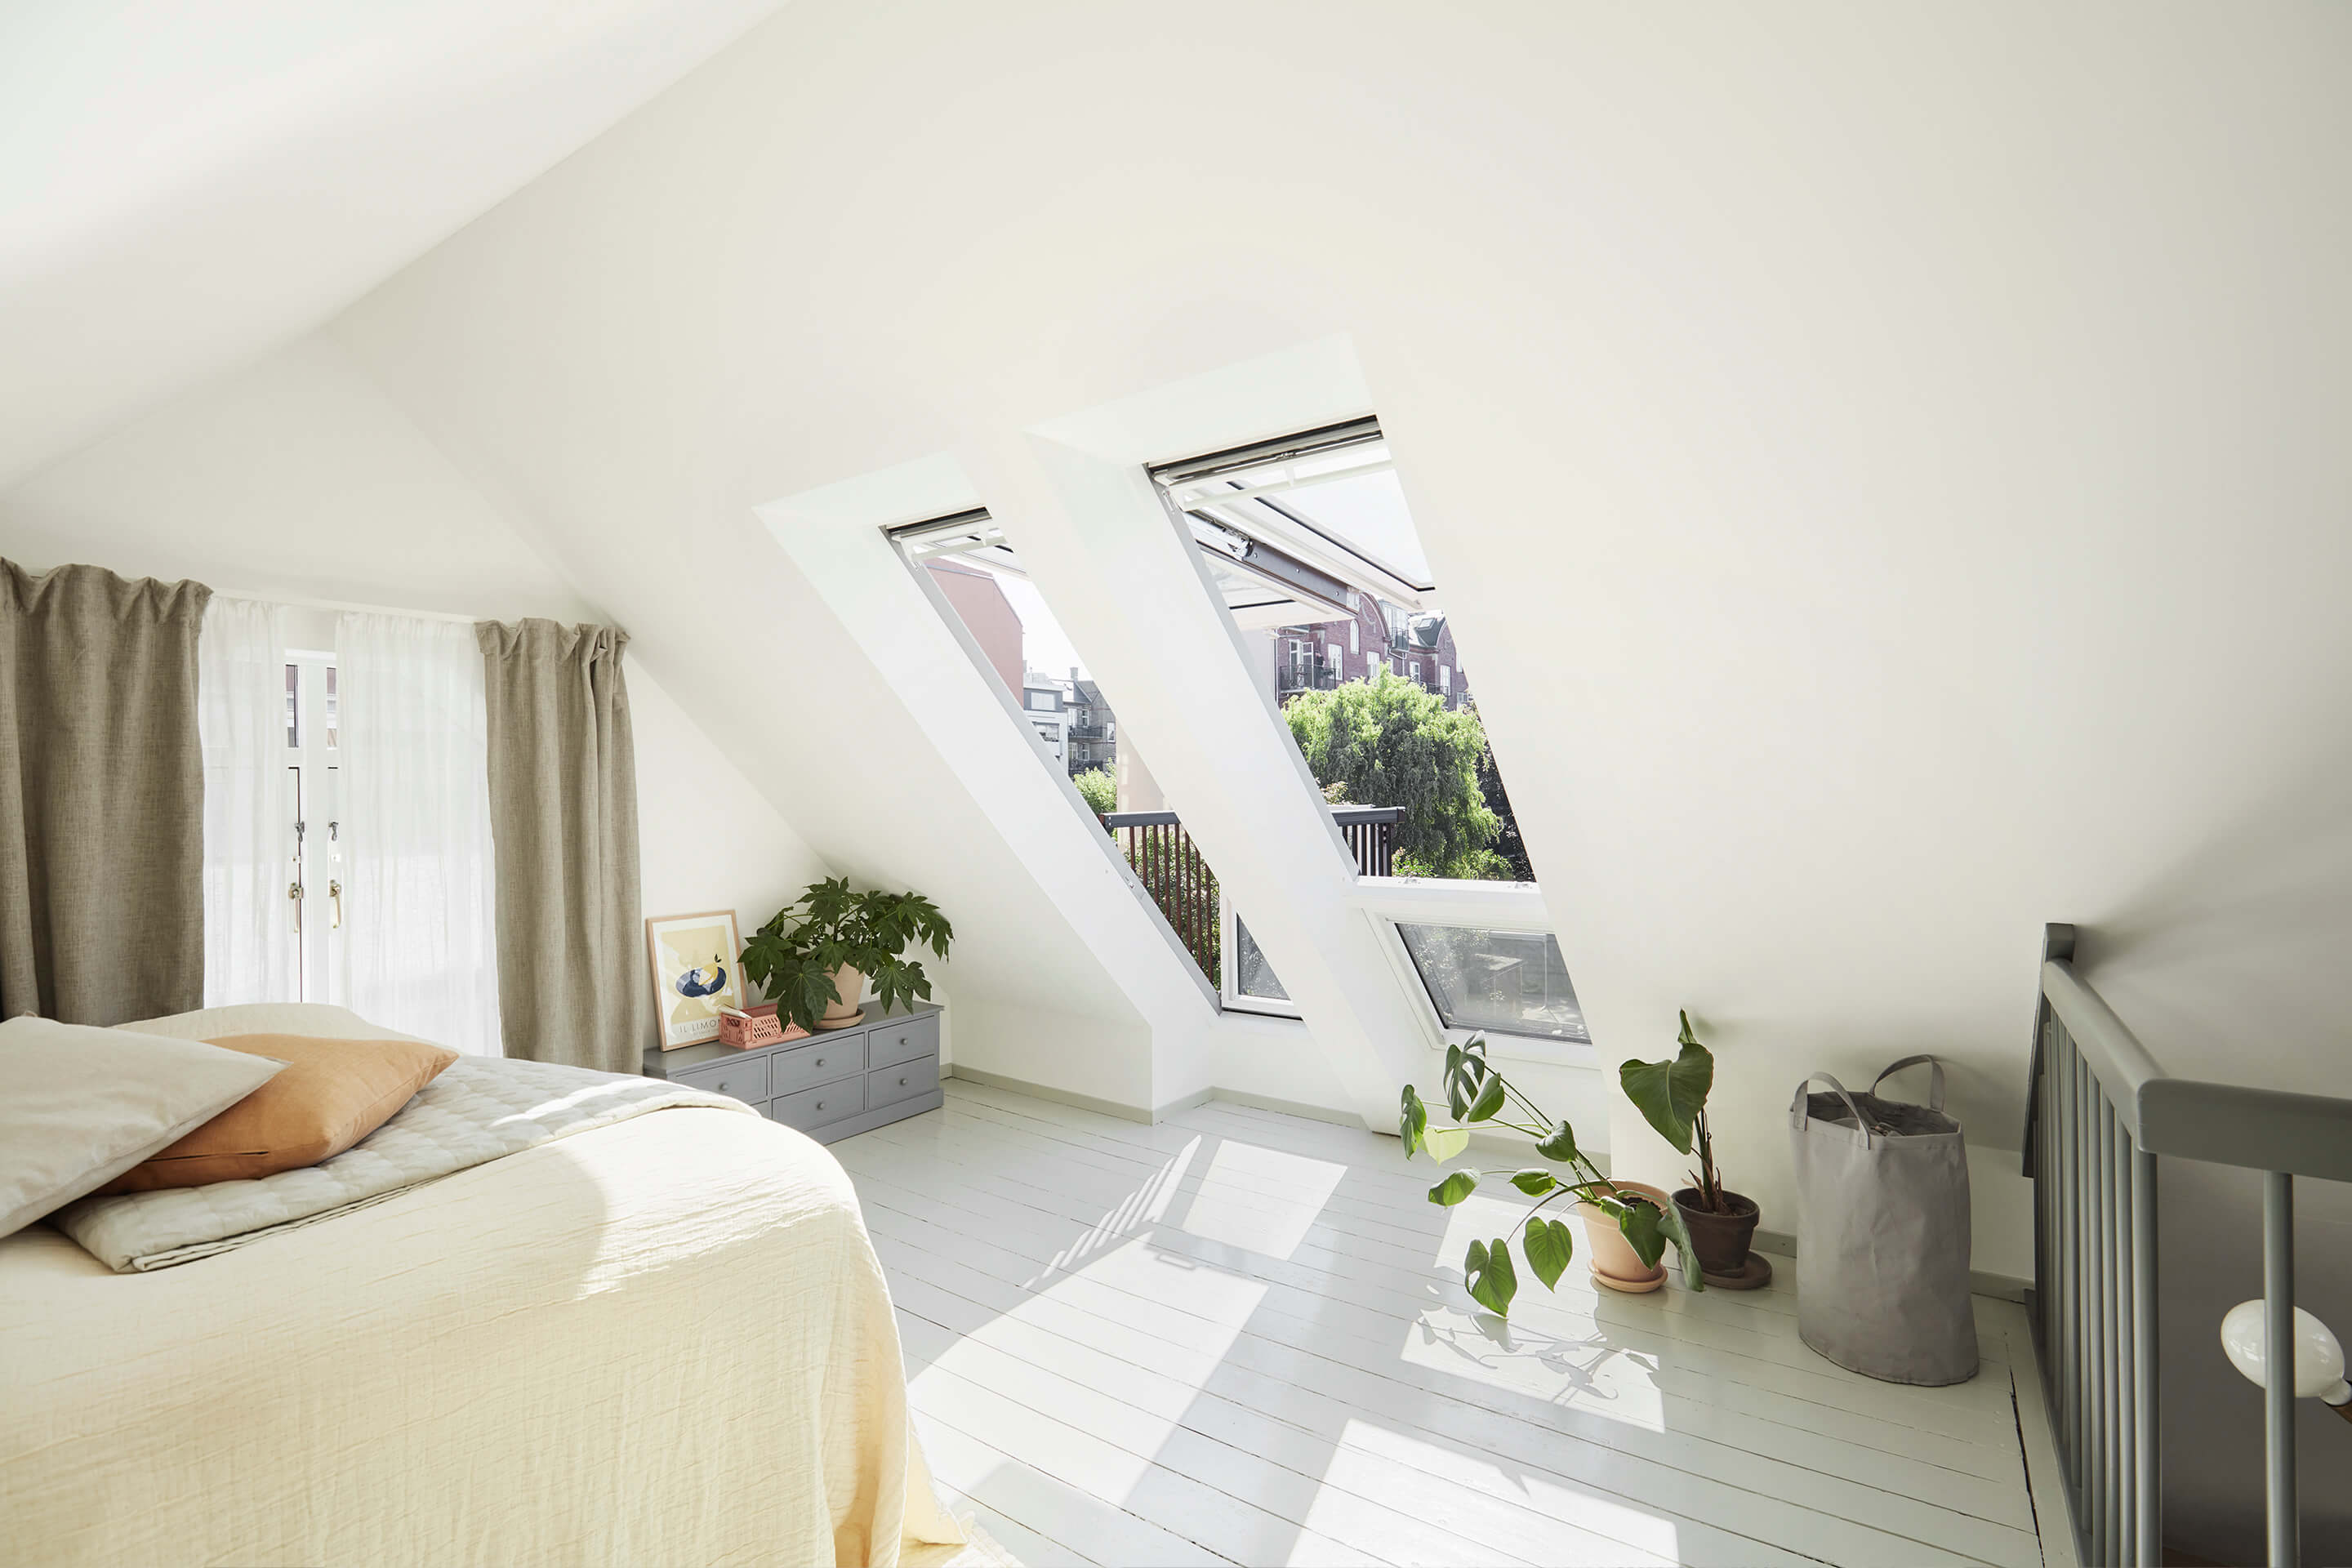 A bright bedroom with two Cabrio roof windows